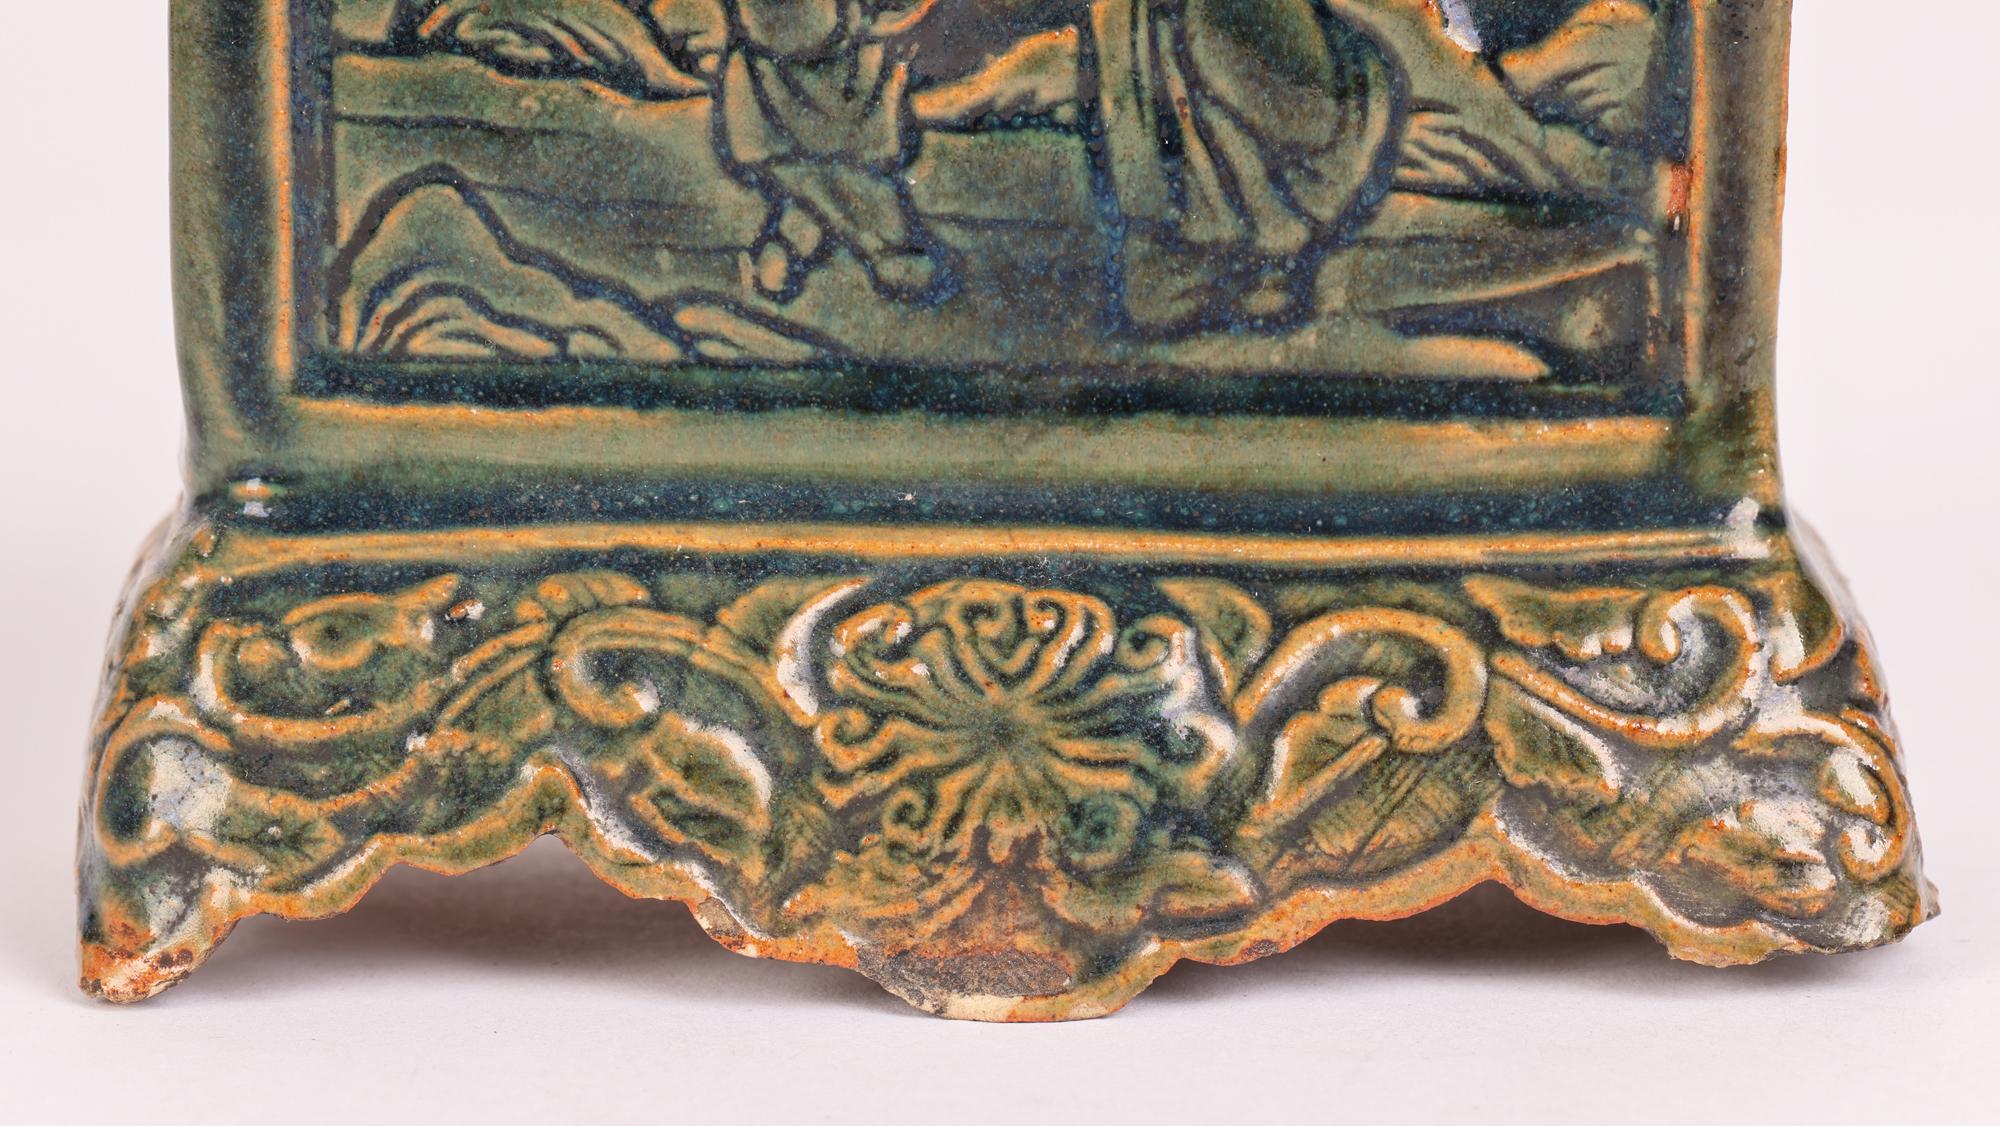 A good Chinese biscuit pottery glazed incense holder with relief molded figural scenes dating from the late Ming period or later. The incense holder stands raised on a footed pedestal base decorated with scrolling floral designs in low relief. With